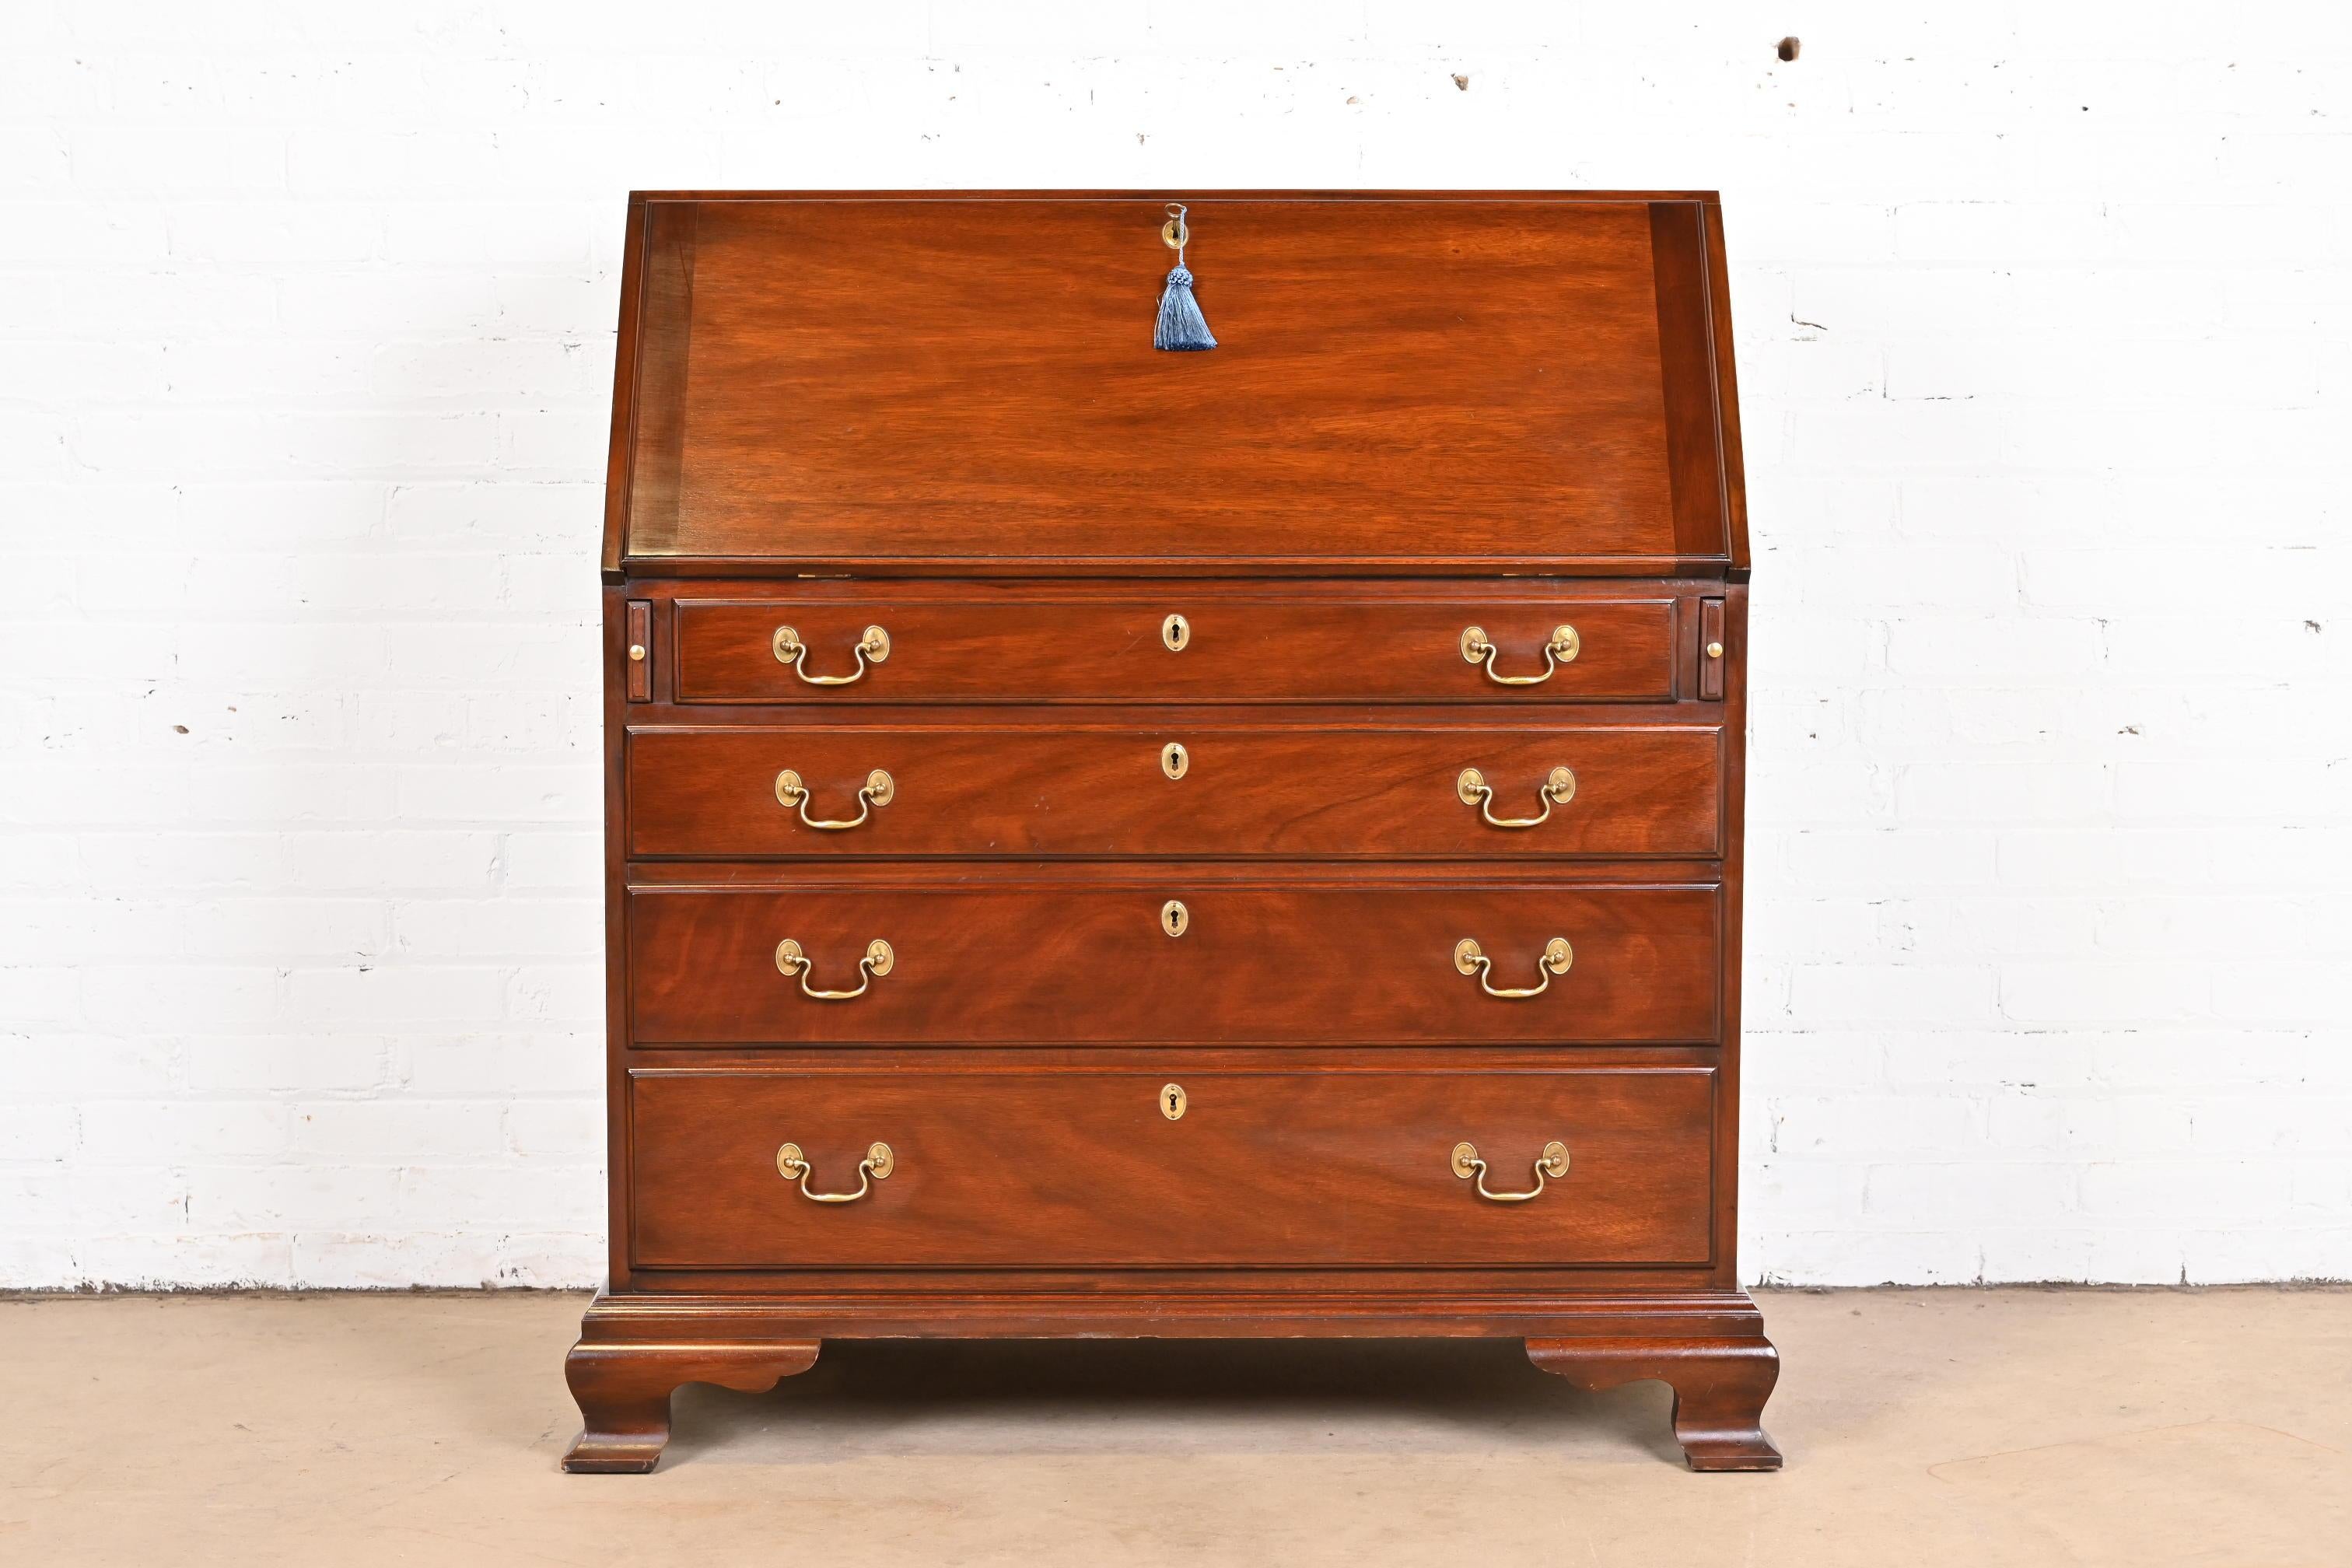 A gorgeous Georgian or Chippendale style bureau with slant front writing desk or secretary desk

By Henkel Harris

USA, 1981

Carved solid mahogany, with original brass hardware. Desk and drawers lock, and key is included.

Measures: 38